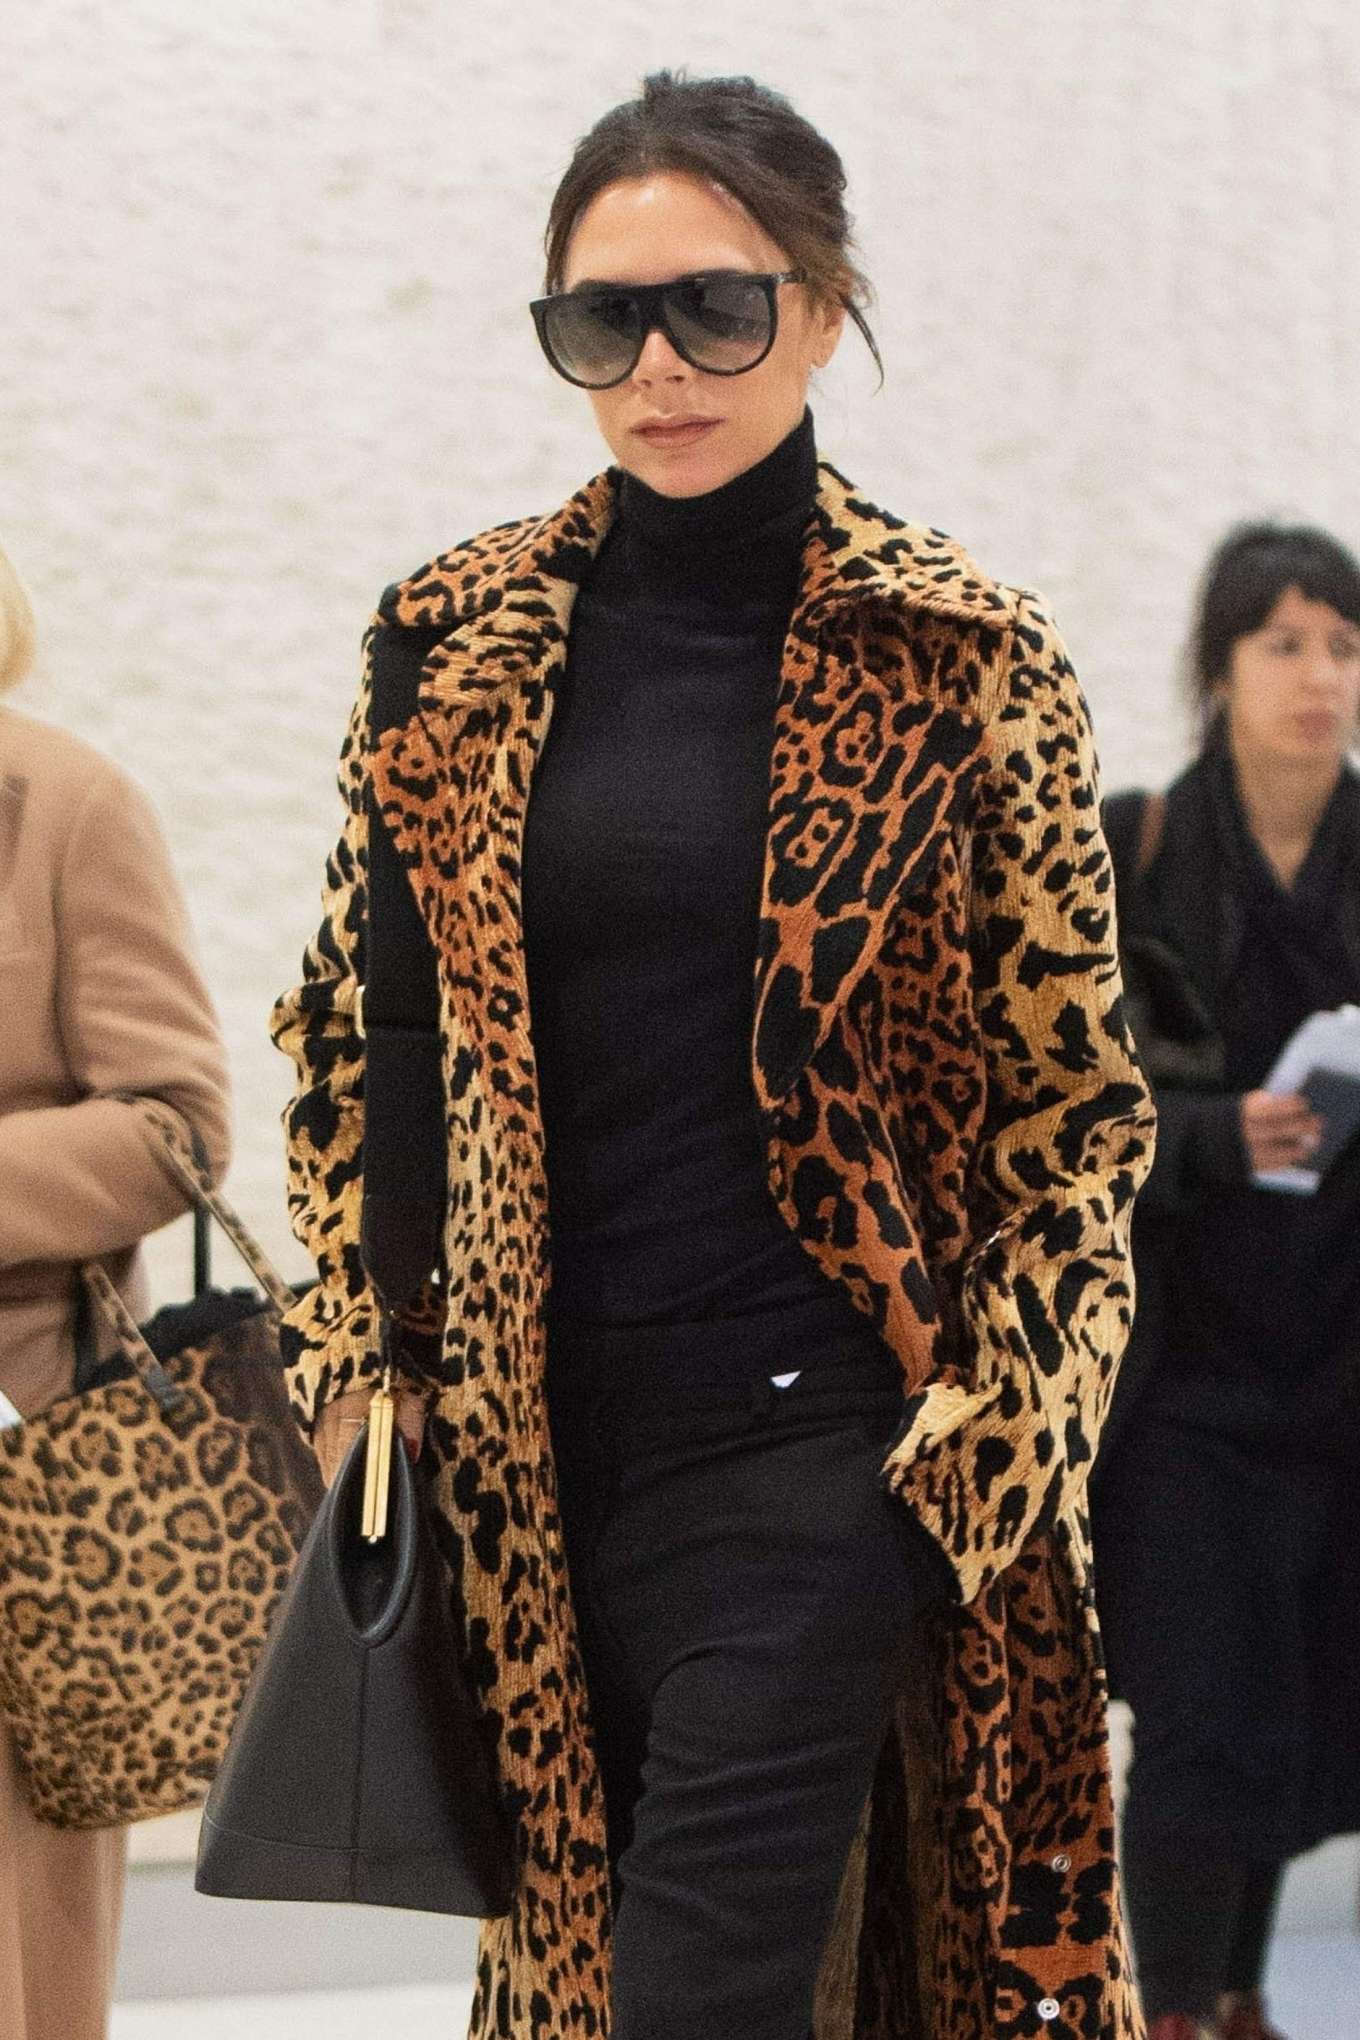 Victoria Beckham â€“ Seen While arrive at JFK Airport in New York